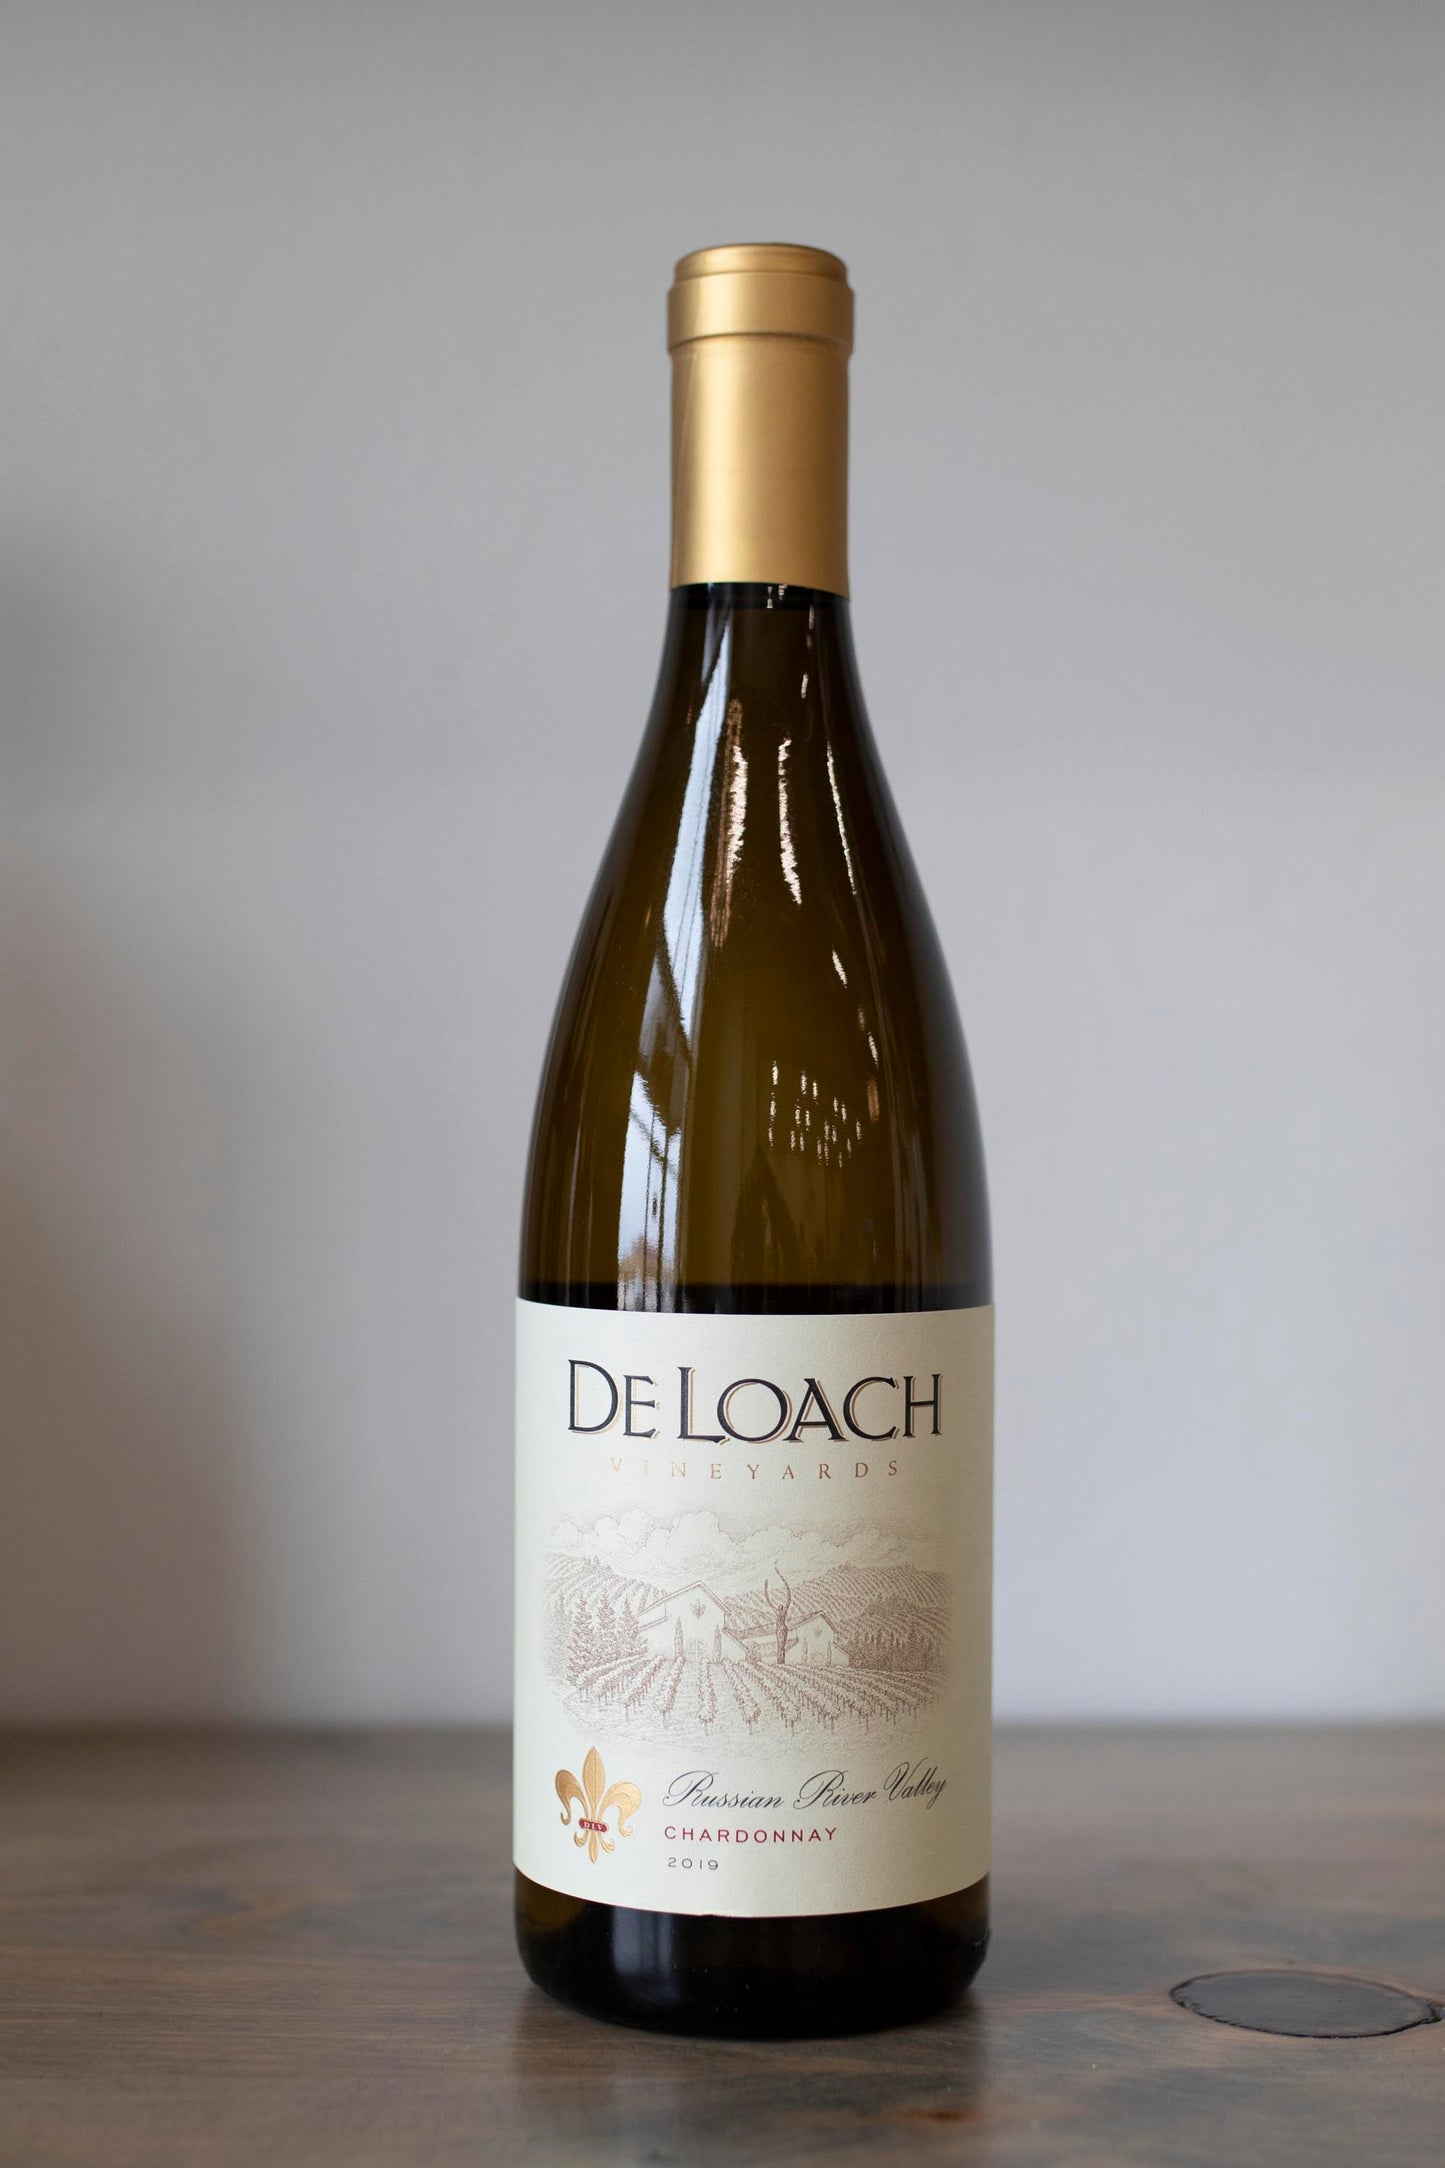 Bottle of Deloach chard found at Vine & Board in 3809 NW 166th St Suite 1, Edmond, OK 73012